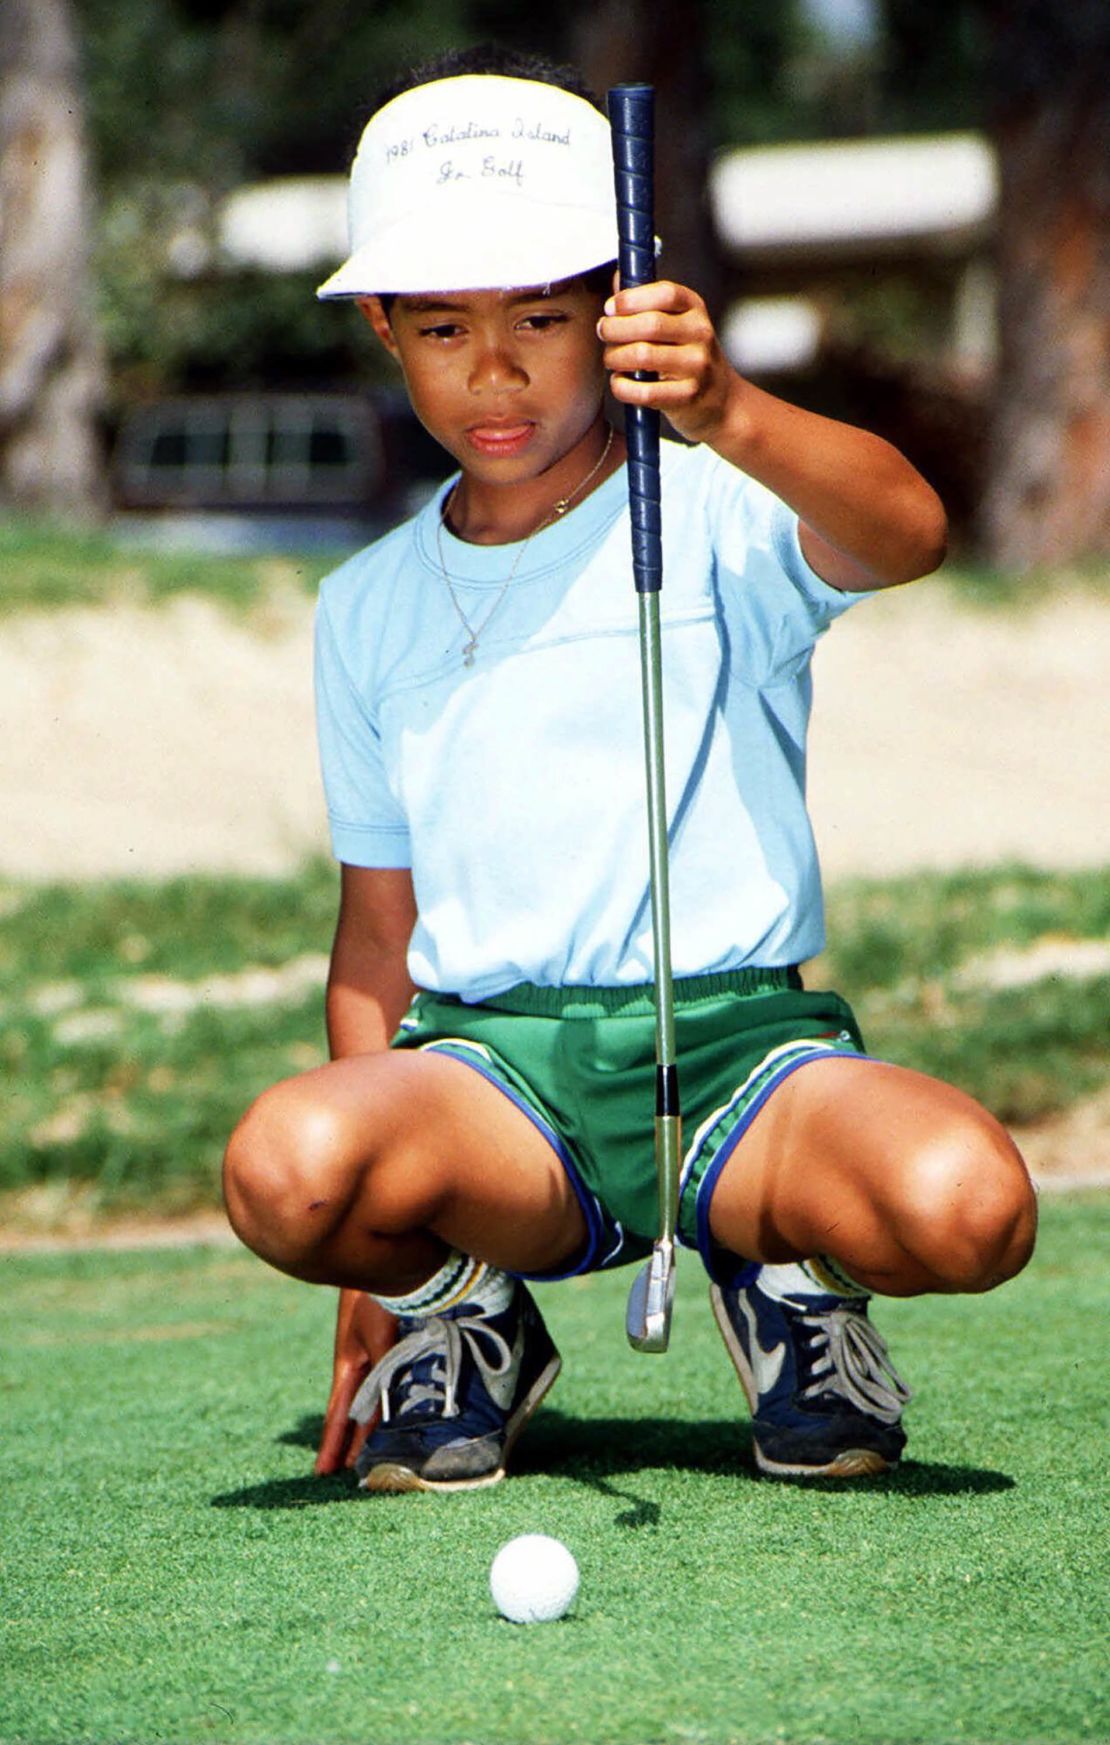 Six-year-old Eldrick 'Tiger' Woods sizes up a putt at Los Alamitos Country Club in Los Alamitos, Calif., in this Sept. 9, 1982 photo.